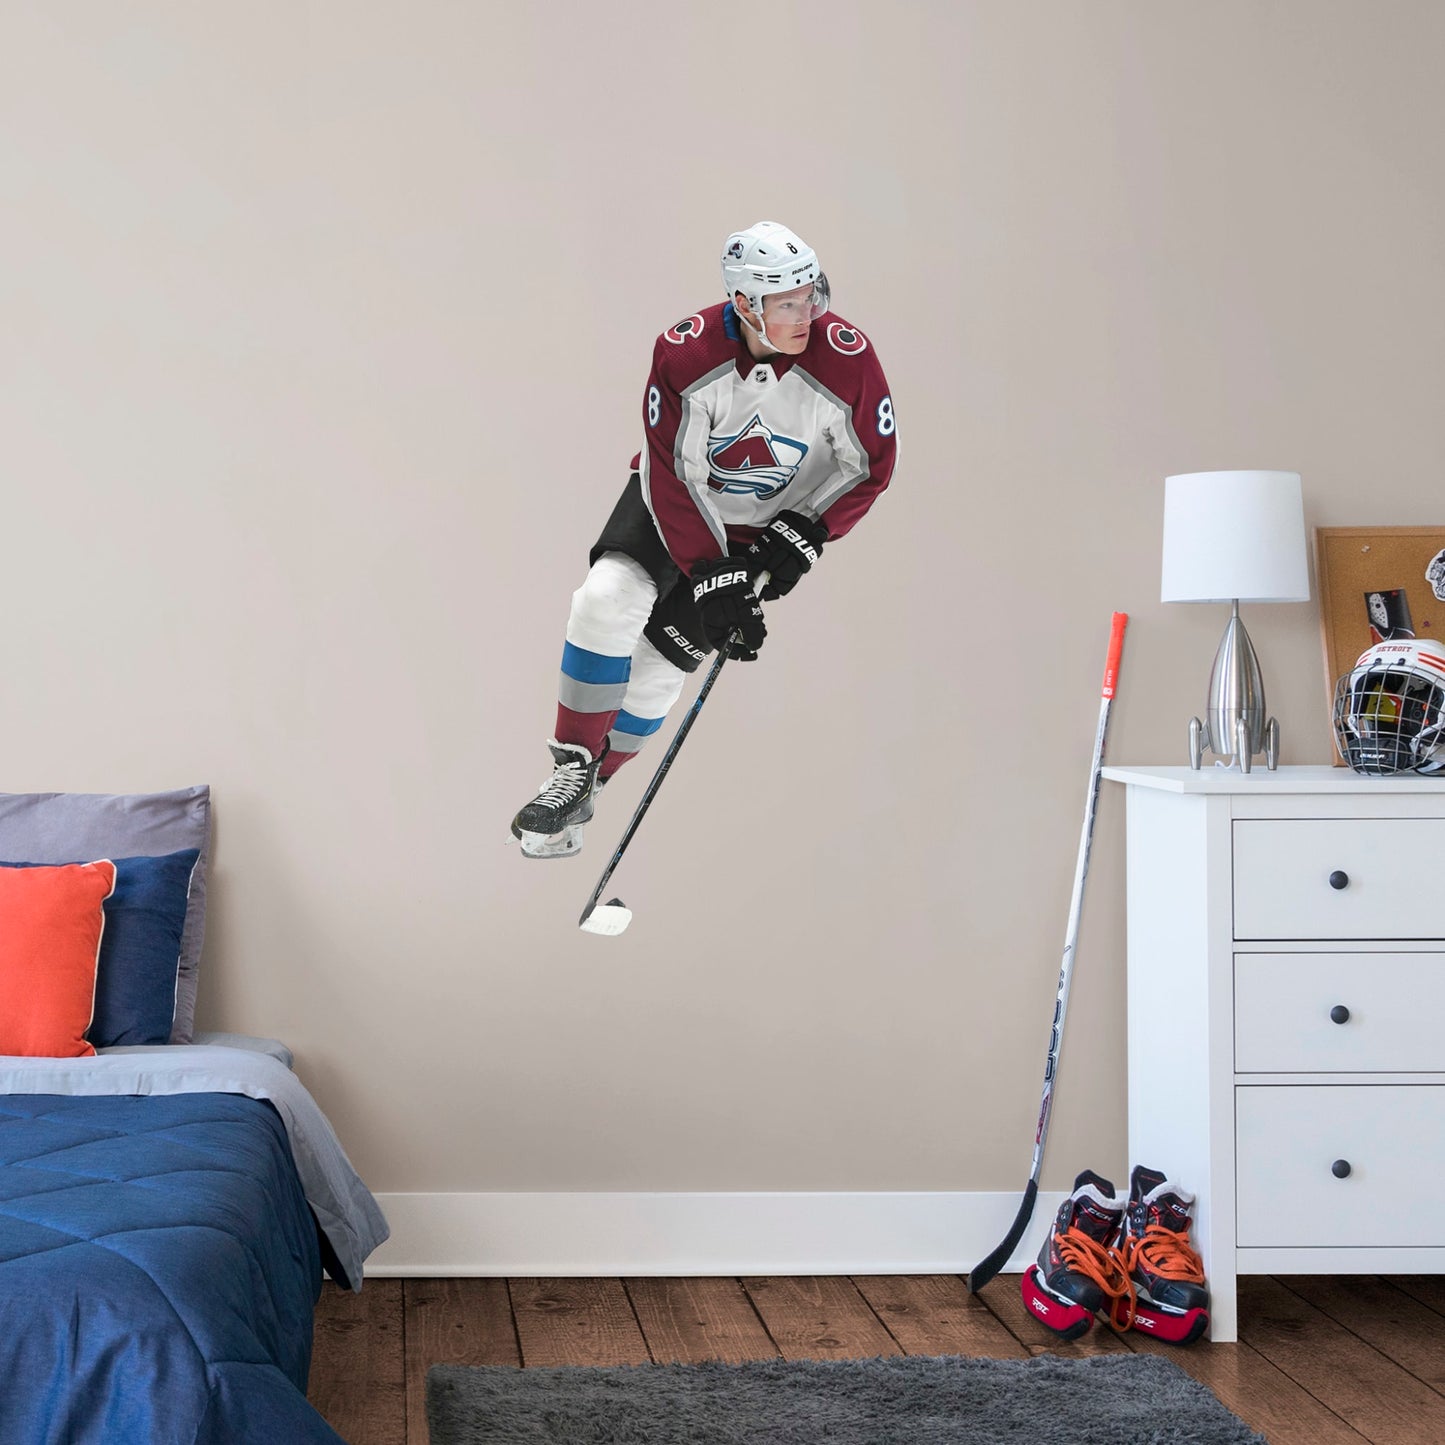 Giant Athlete + 2 Team Decals (28"W x 51"H) If you can't make it out to the rink, bring the rink to your TV room with a high-quality, movable decal of Colorado Avalanche defenseman Cale Makar. Show your support for this first-round pick and Calder Memorial Trophy winner on game day with this heavy-duty wall decal. After all, when it comes to showing your support for the Avs, you gotta go big or go home.